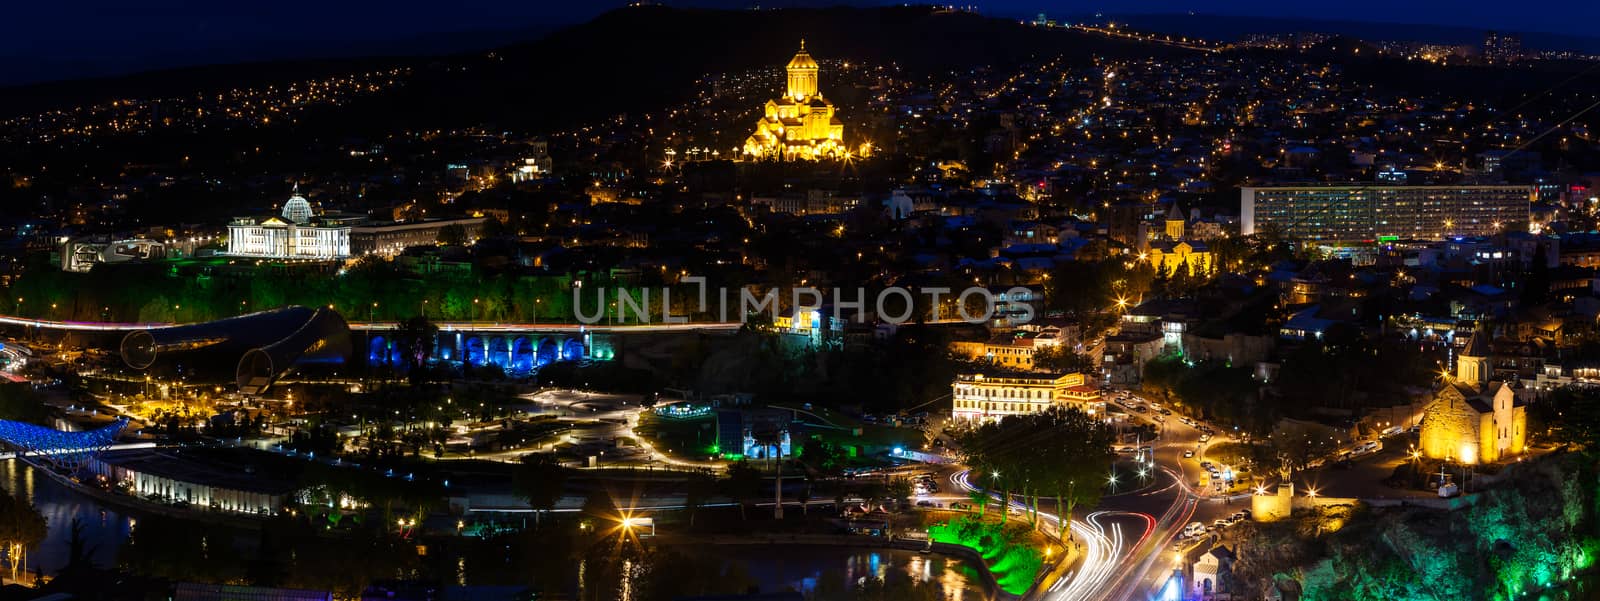 Night panorama view of Tbilisi, capital of Georgia country. Metekhi church, Holy Trinity Cathedral (Sameba) and Presidential Administration at night with illumination and moving cars.